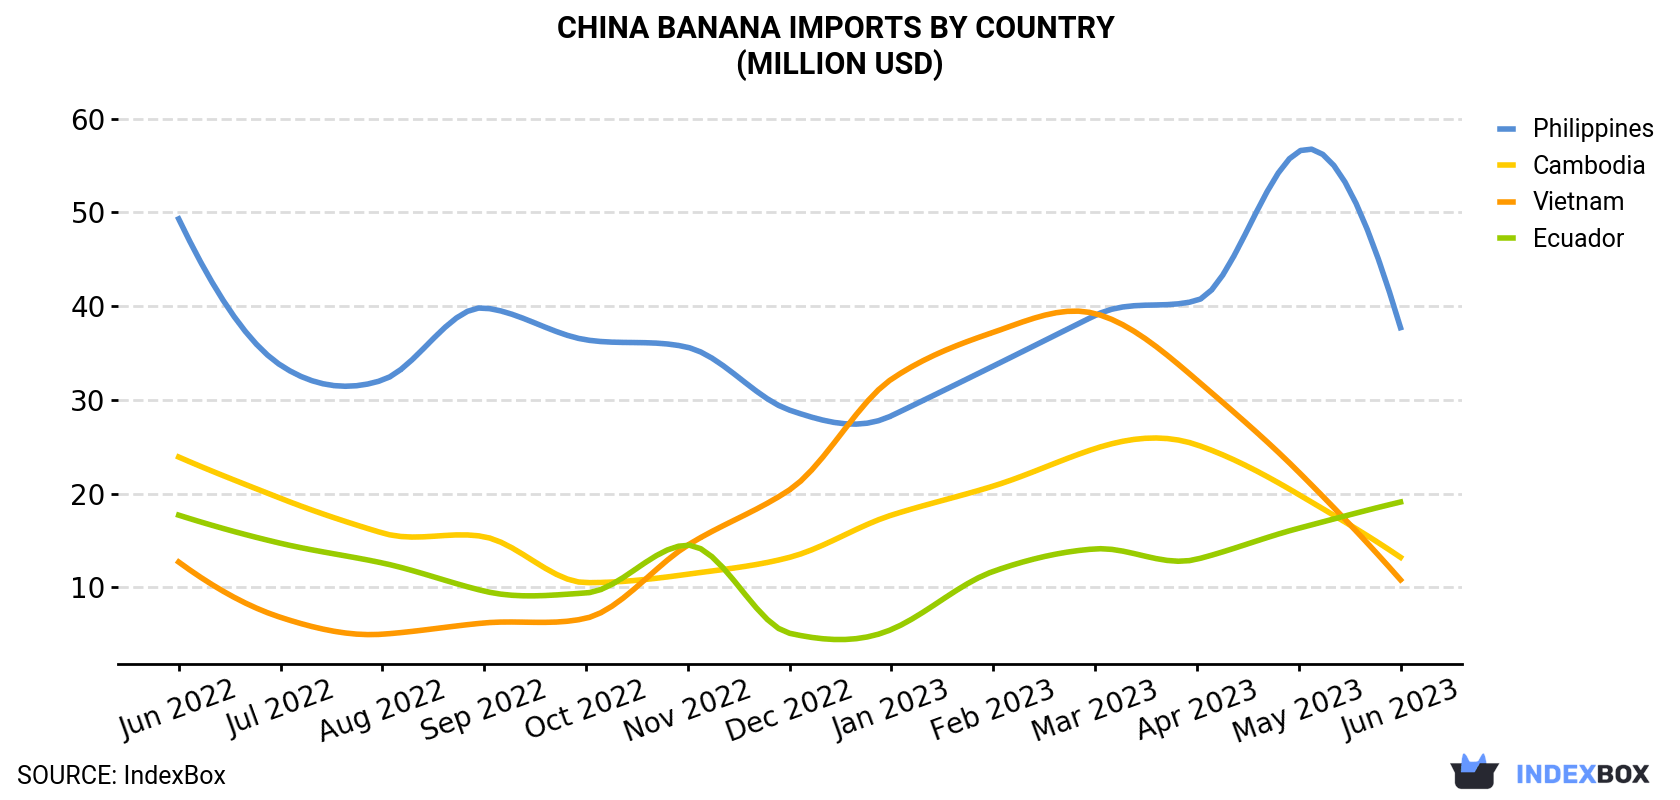 China's June 2023 Banana Import Decreases Significantly to $85M - News ...